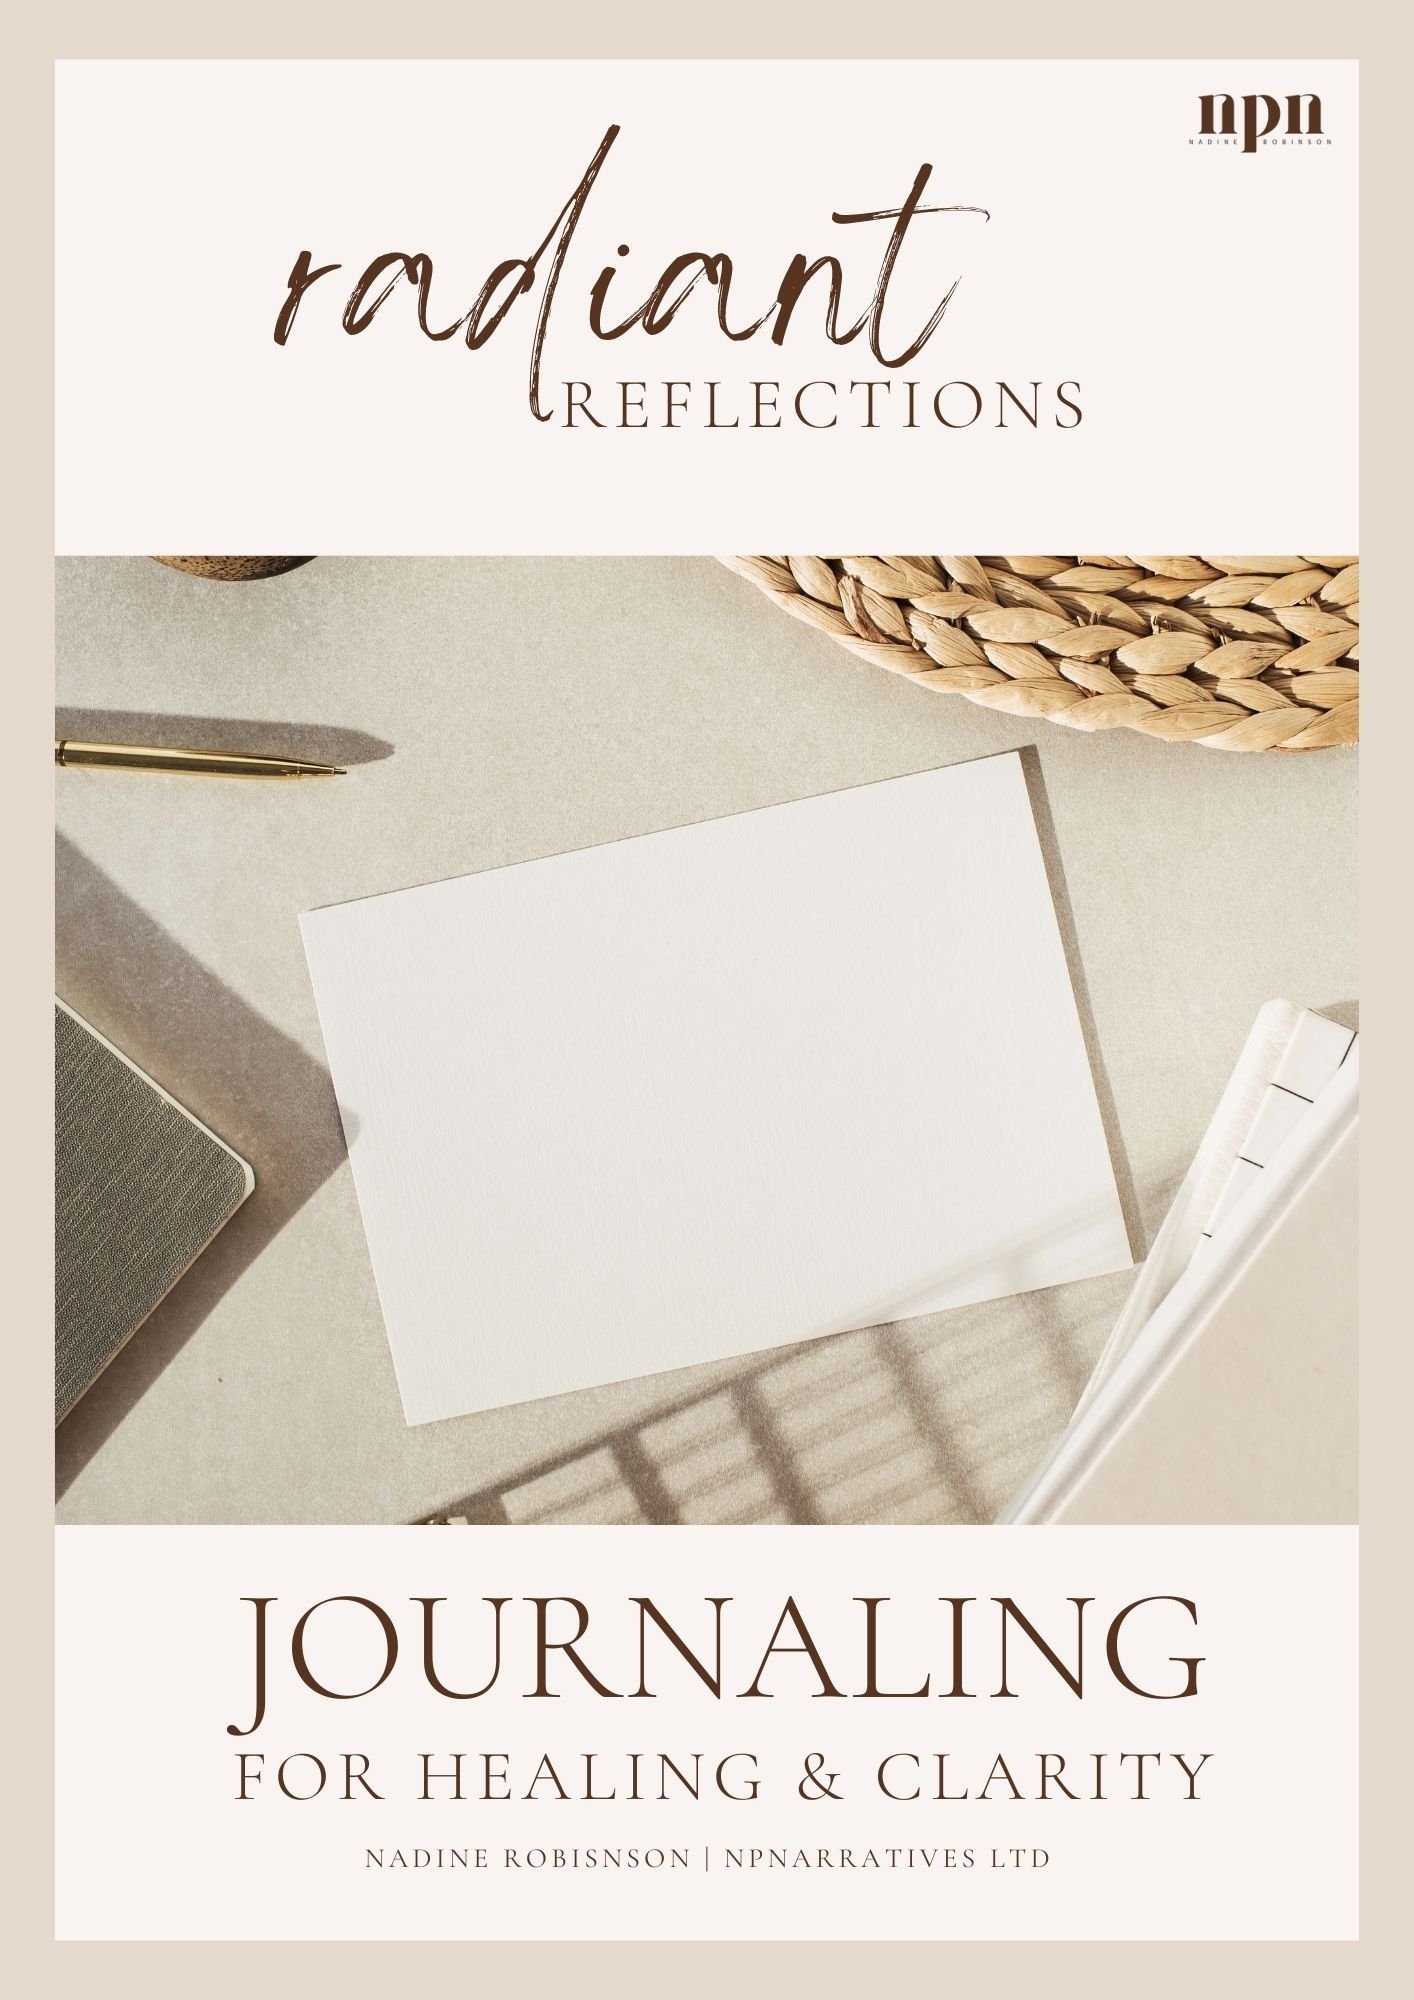 Radiant Reflections: Journaling for Healing and Clarity